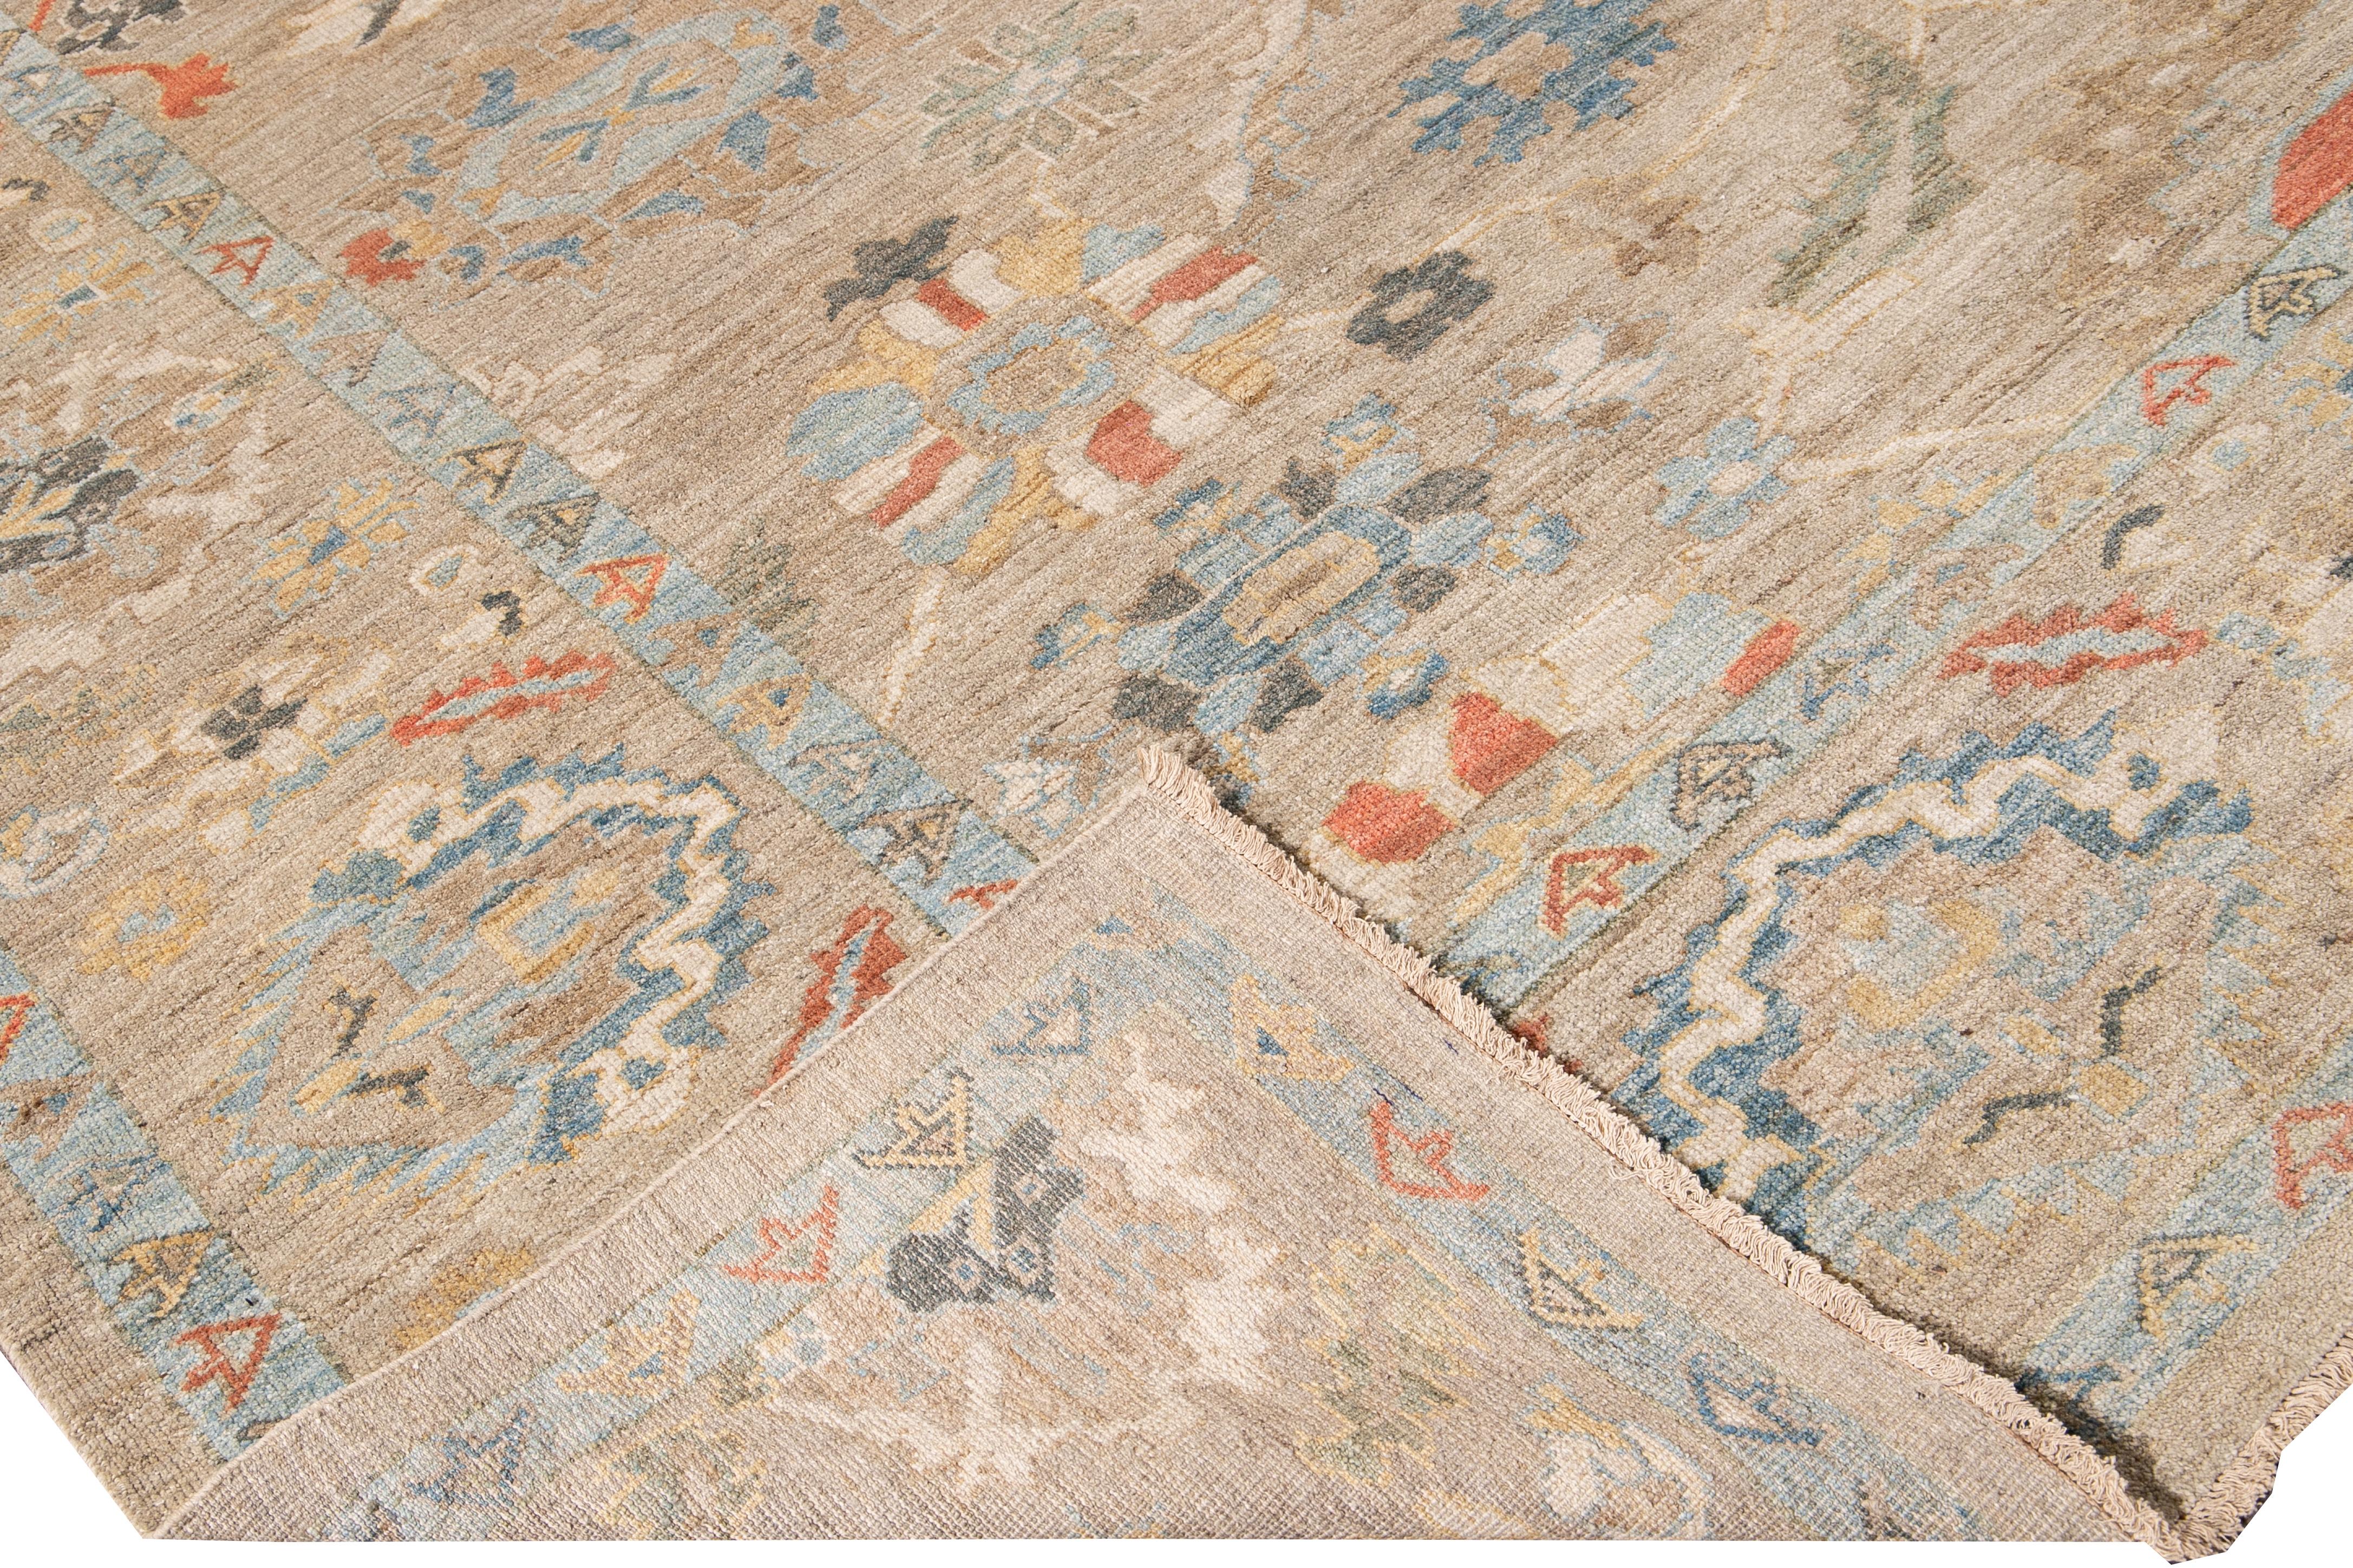 Beautiful modern Oversize Sultanabad hand-knotted wool rug with a beige field. This Sultanabad rug has ivory, yellow, blue, and orange accents in a gorgeous all-over Classic geometric floral design.

This rug measures: 10'11